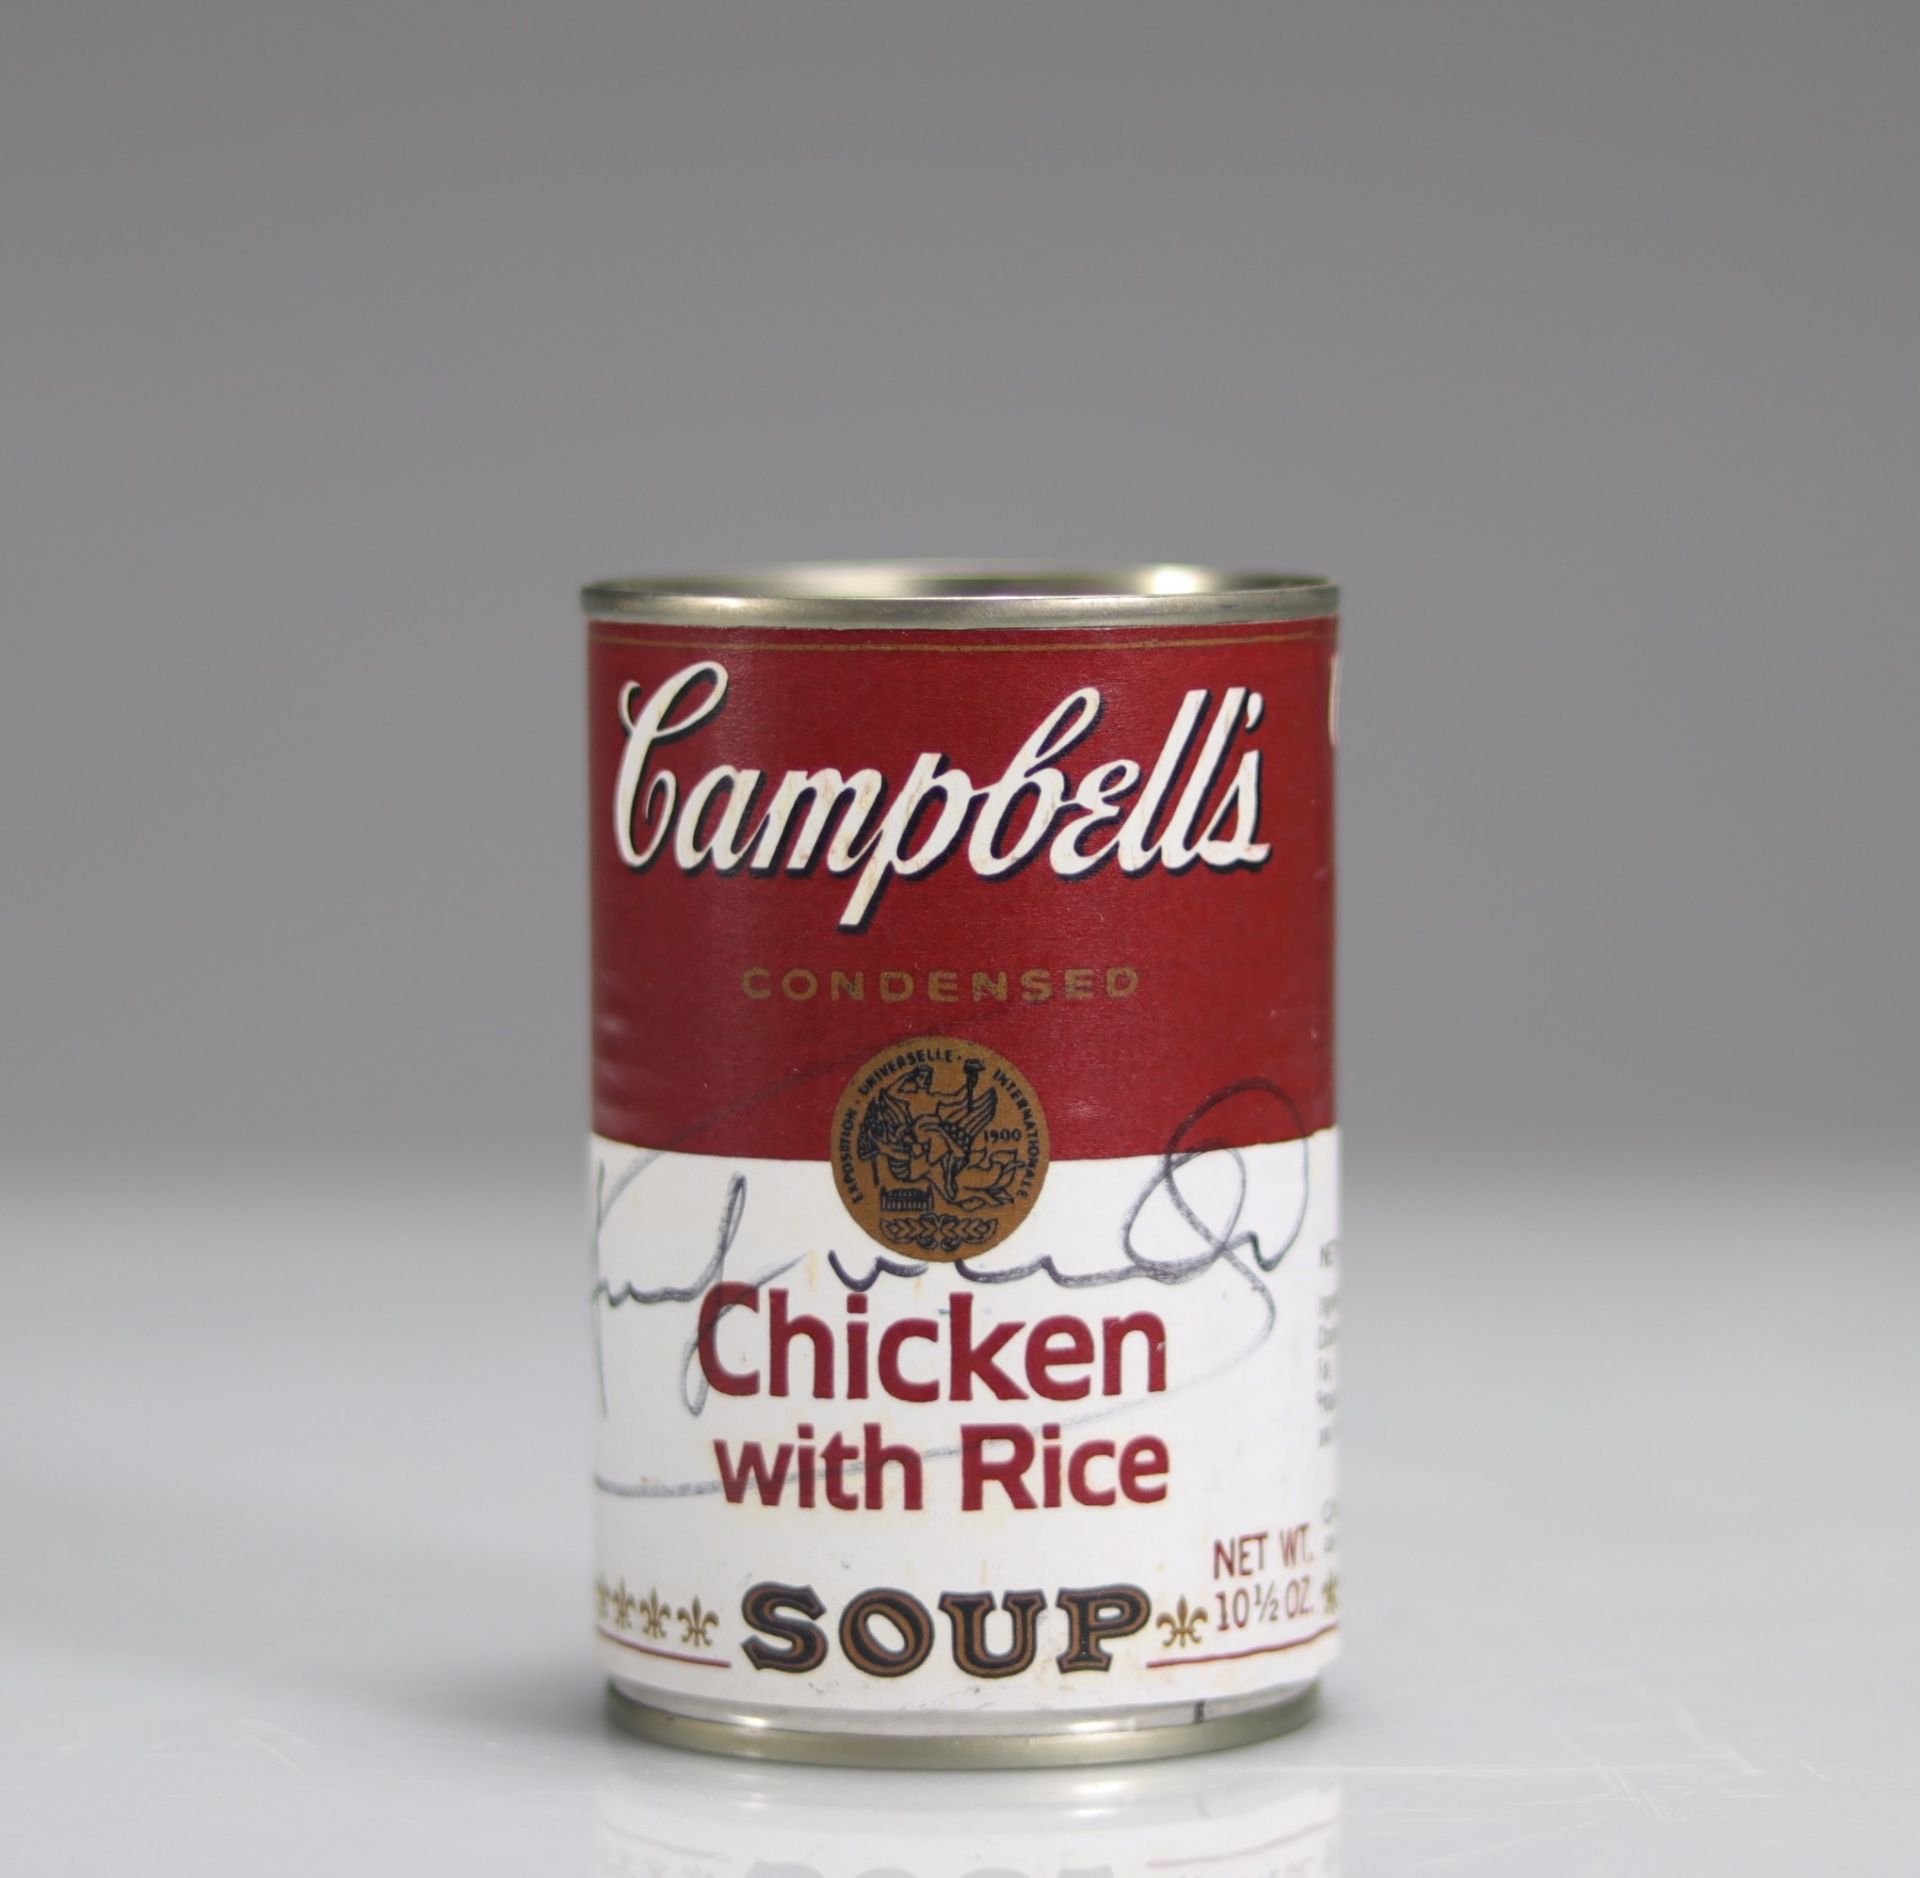 Andy Warhol (after). Campbell's Soup "Chiken with rice". Metal tin can.